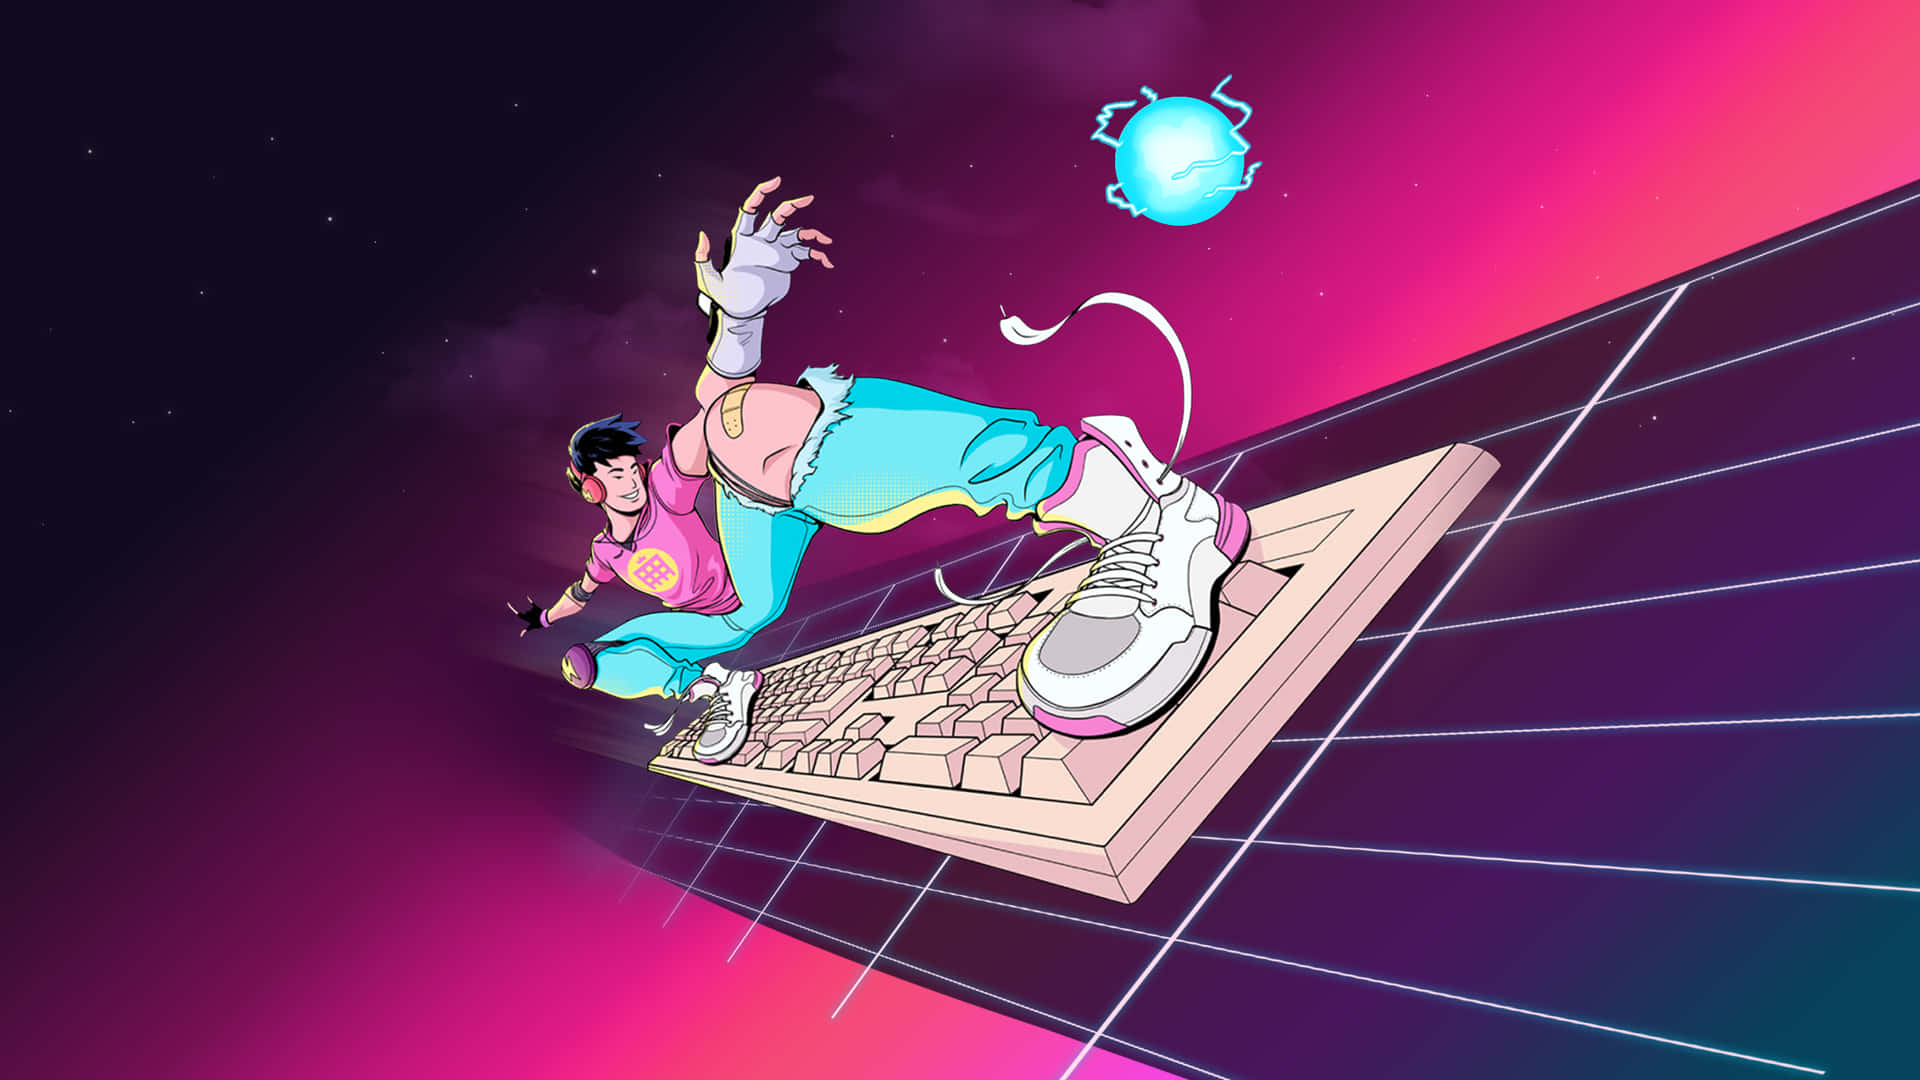 A Man Is Riding A Keyboard In A Neon Colored Space